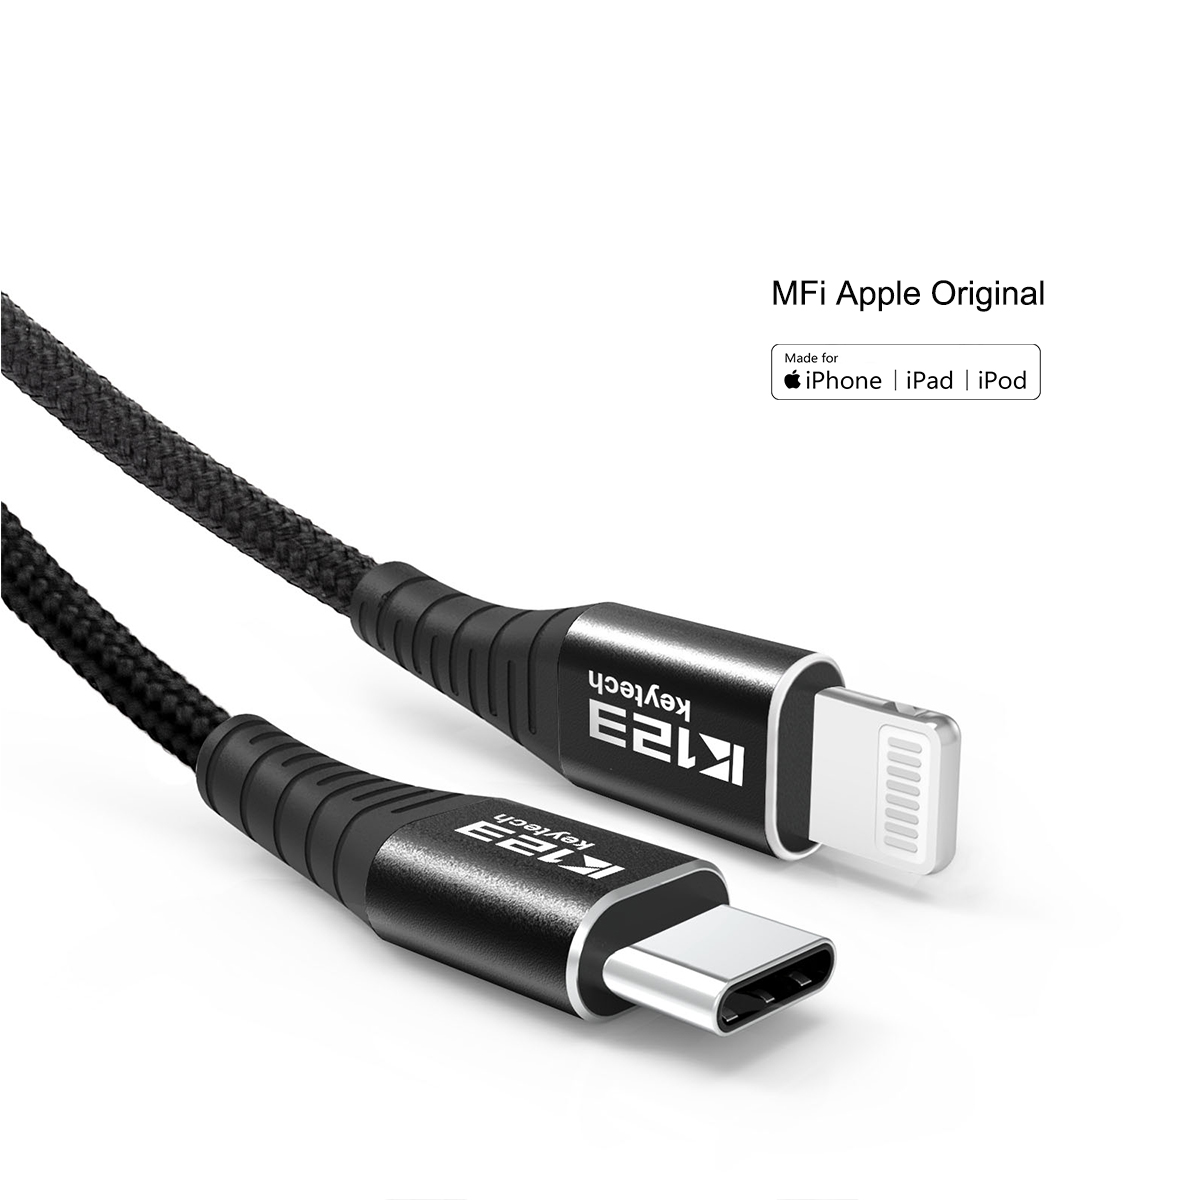 2 Pack iPhone Charger Lightning Cable 3ft 6ft Apple MFi Certified USB Cord 1M 2M K123 Keytech Black Braided USB Data Cable for iPhone Xs/Xs Max/XR/X/8/8 Plus/7/7 Plus/6/6 Plus/5 iPad 